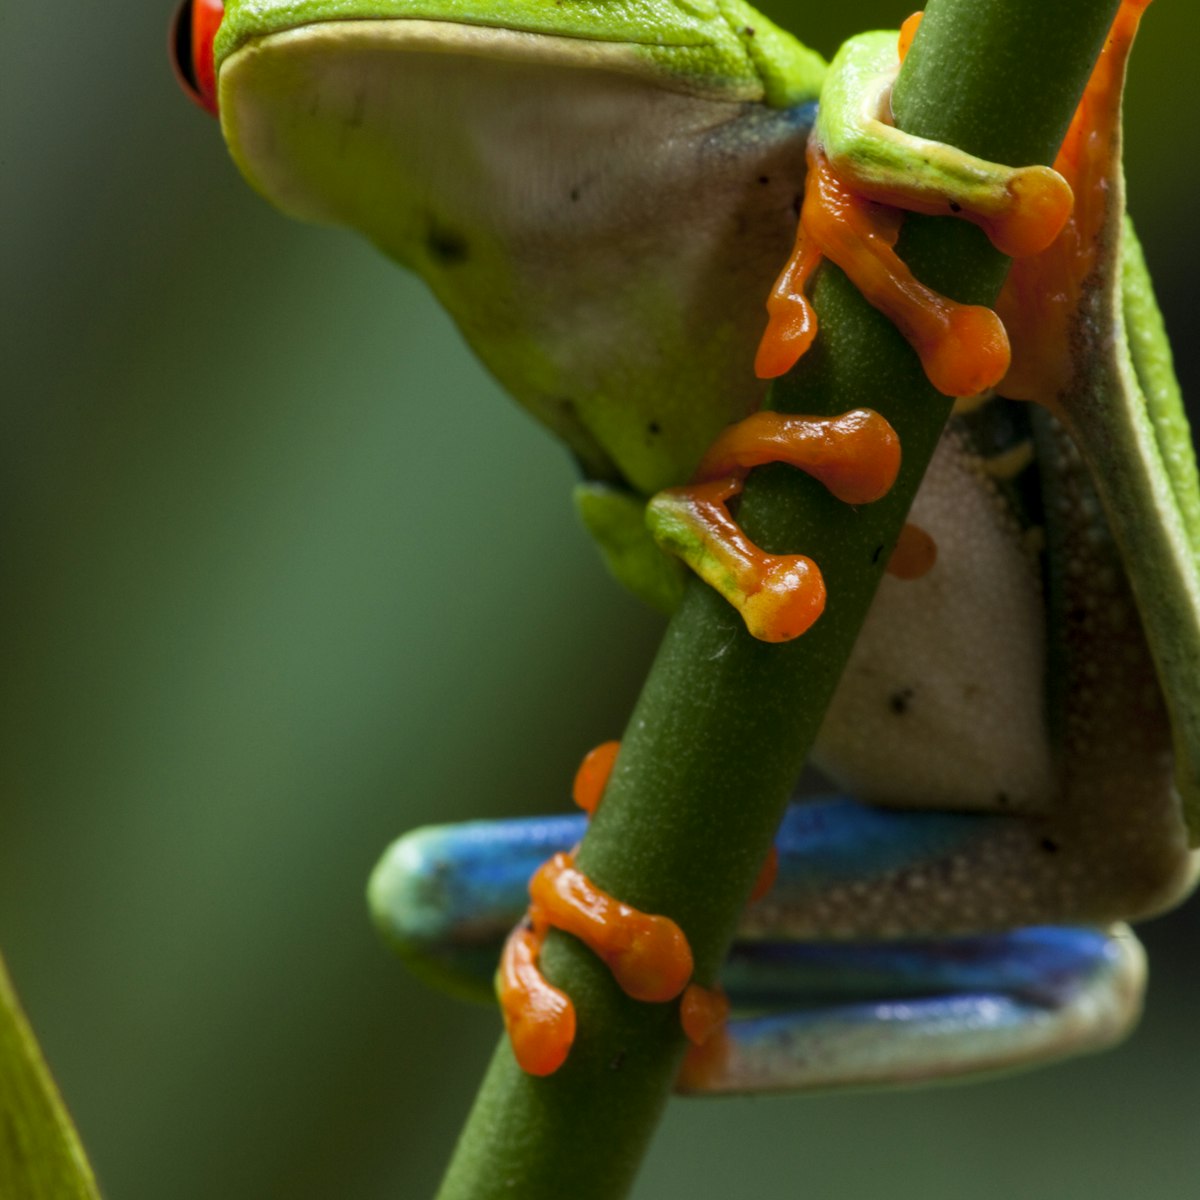 Red-Eyed Tree Frog, Costa Rica